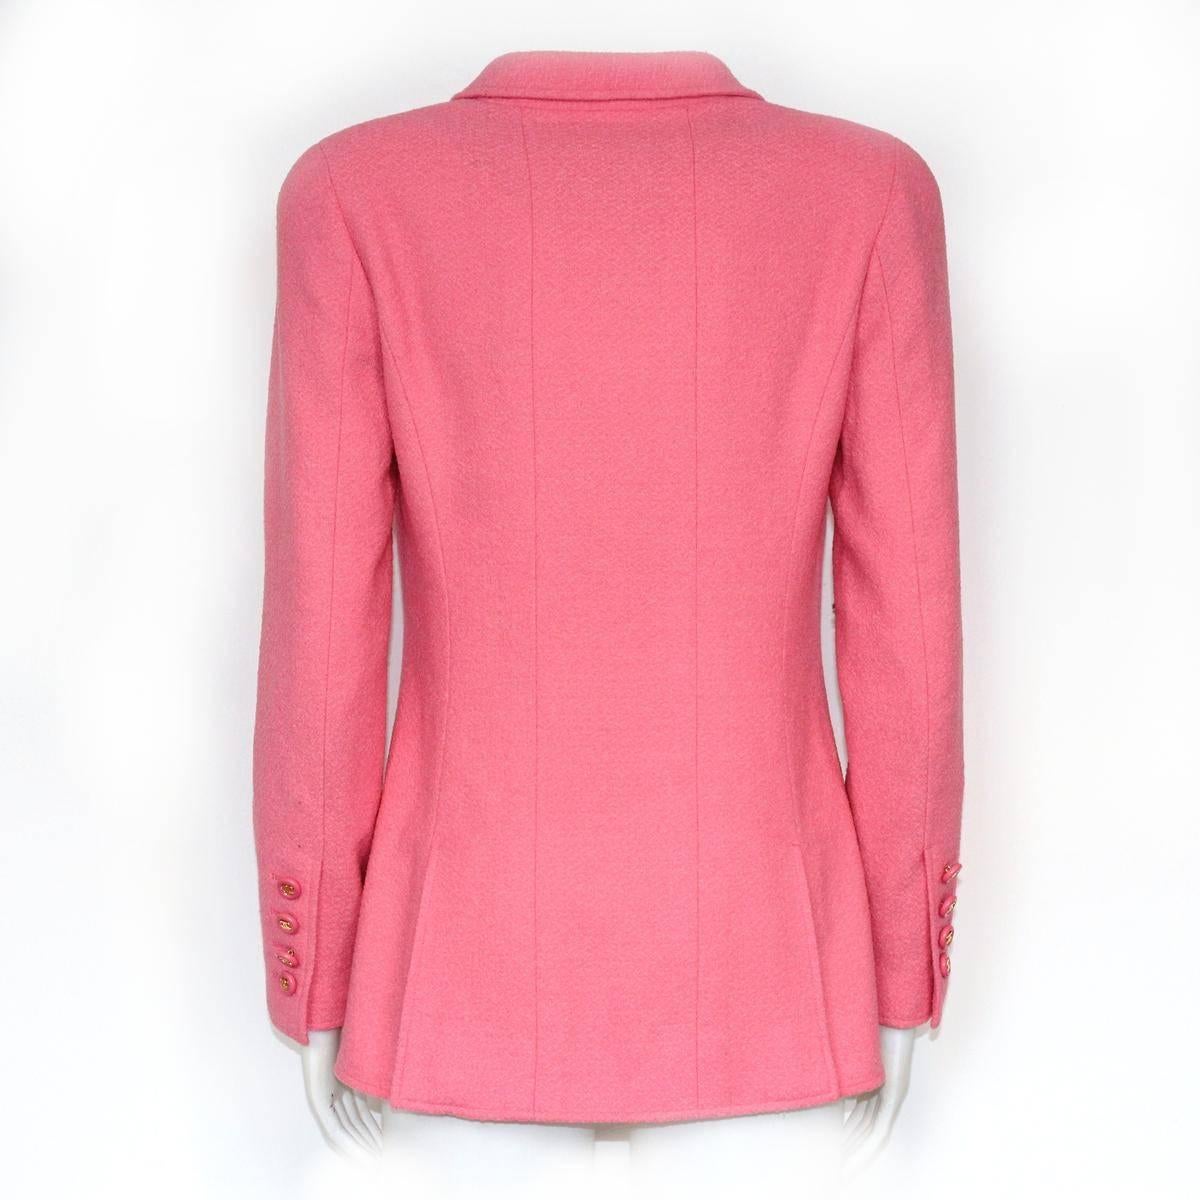 Beautiful and iconic Chanel Jacket
Wool
Pink color
Central buttons with golden CC
2 pockets
Total length  shoulder / hem cm 63 (24.8 inches)
French size 38 (italian 42)
Worldwide express shipping included in the price !